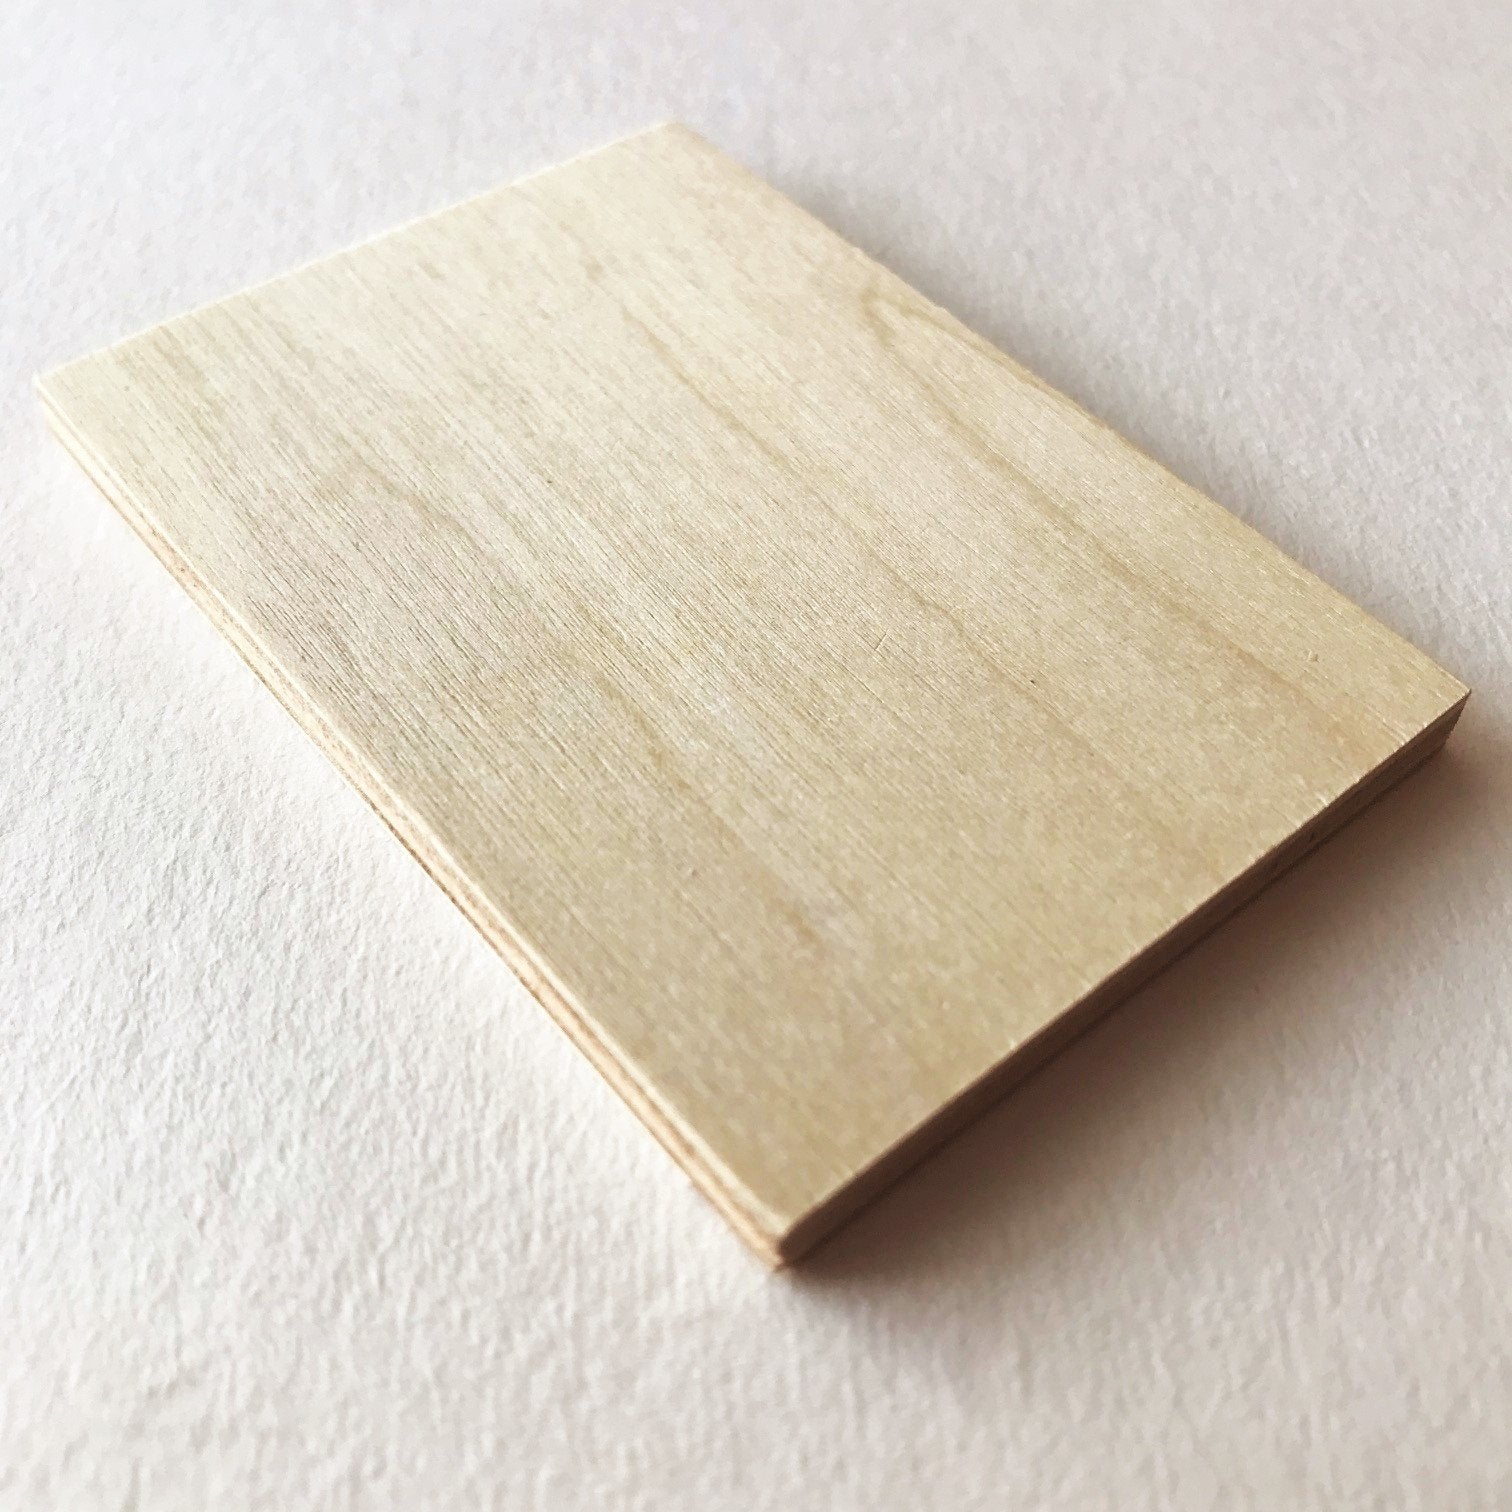 Basswood Sheet 3/6mm Plywood Wood Sheet For Laser Cutting